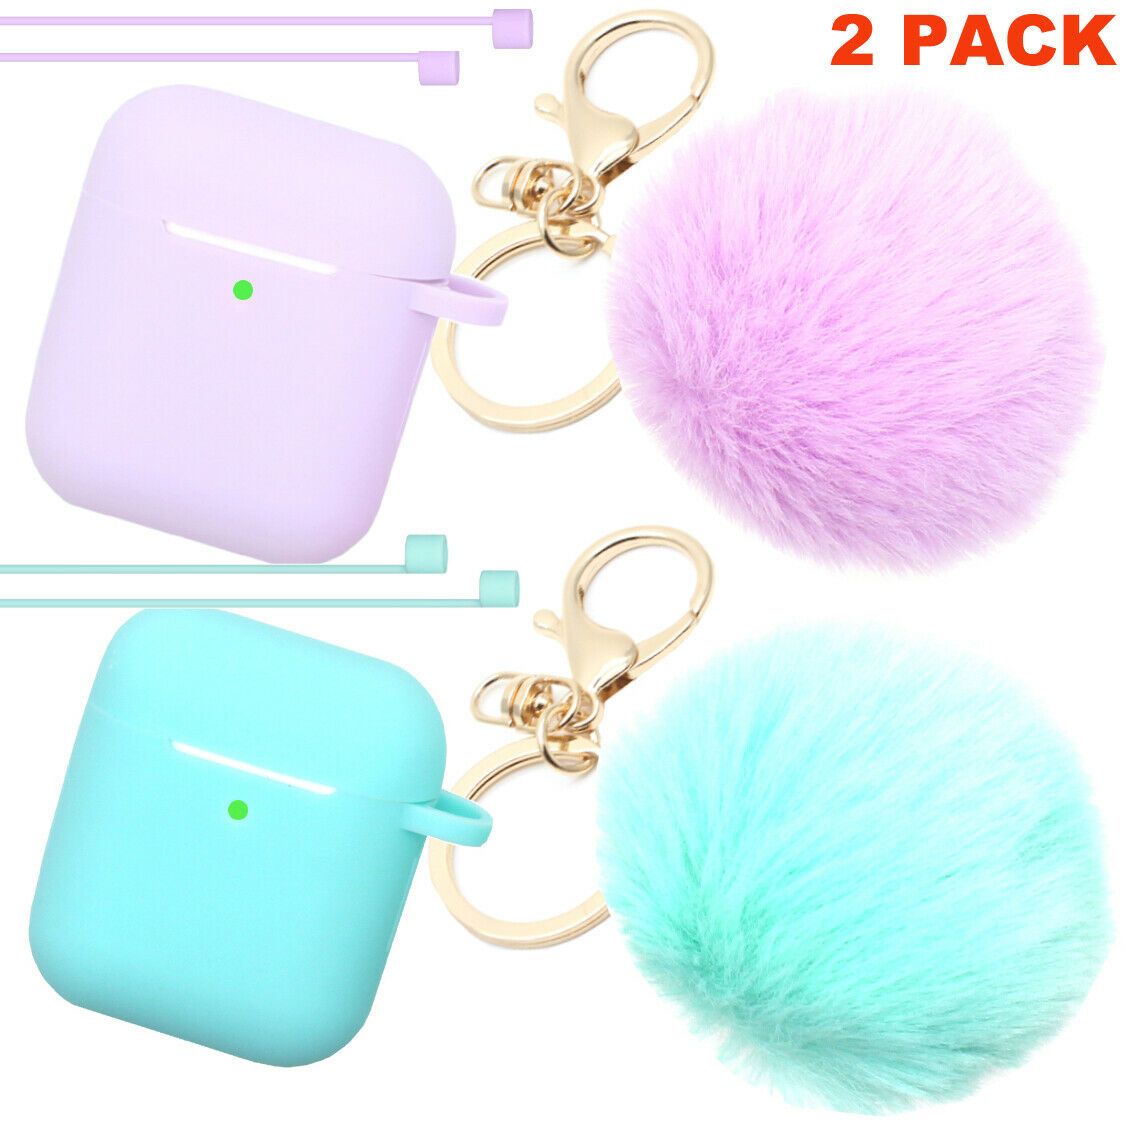 Cute Airpods Silicone Case Cover w/Fur Ball Keychain Strap for Apple Airpods 1/2 ervin.accessories Mint+Purple(2 Pack) 